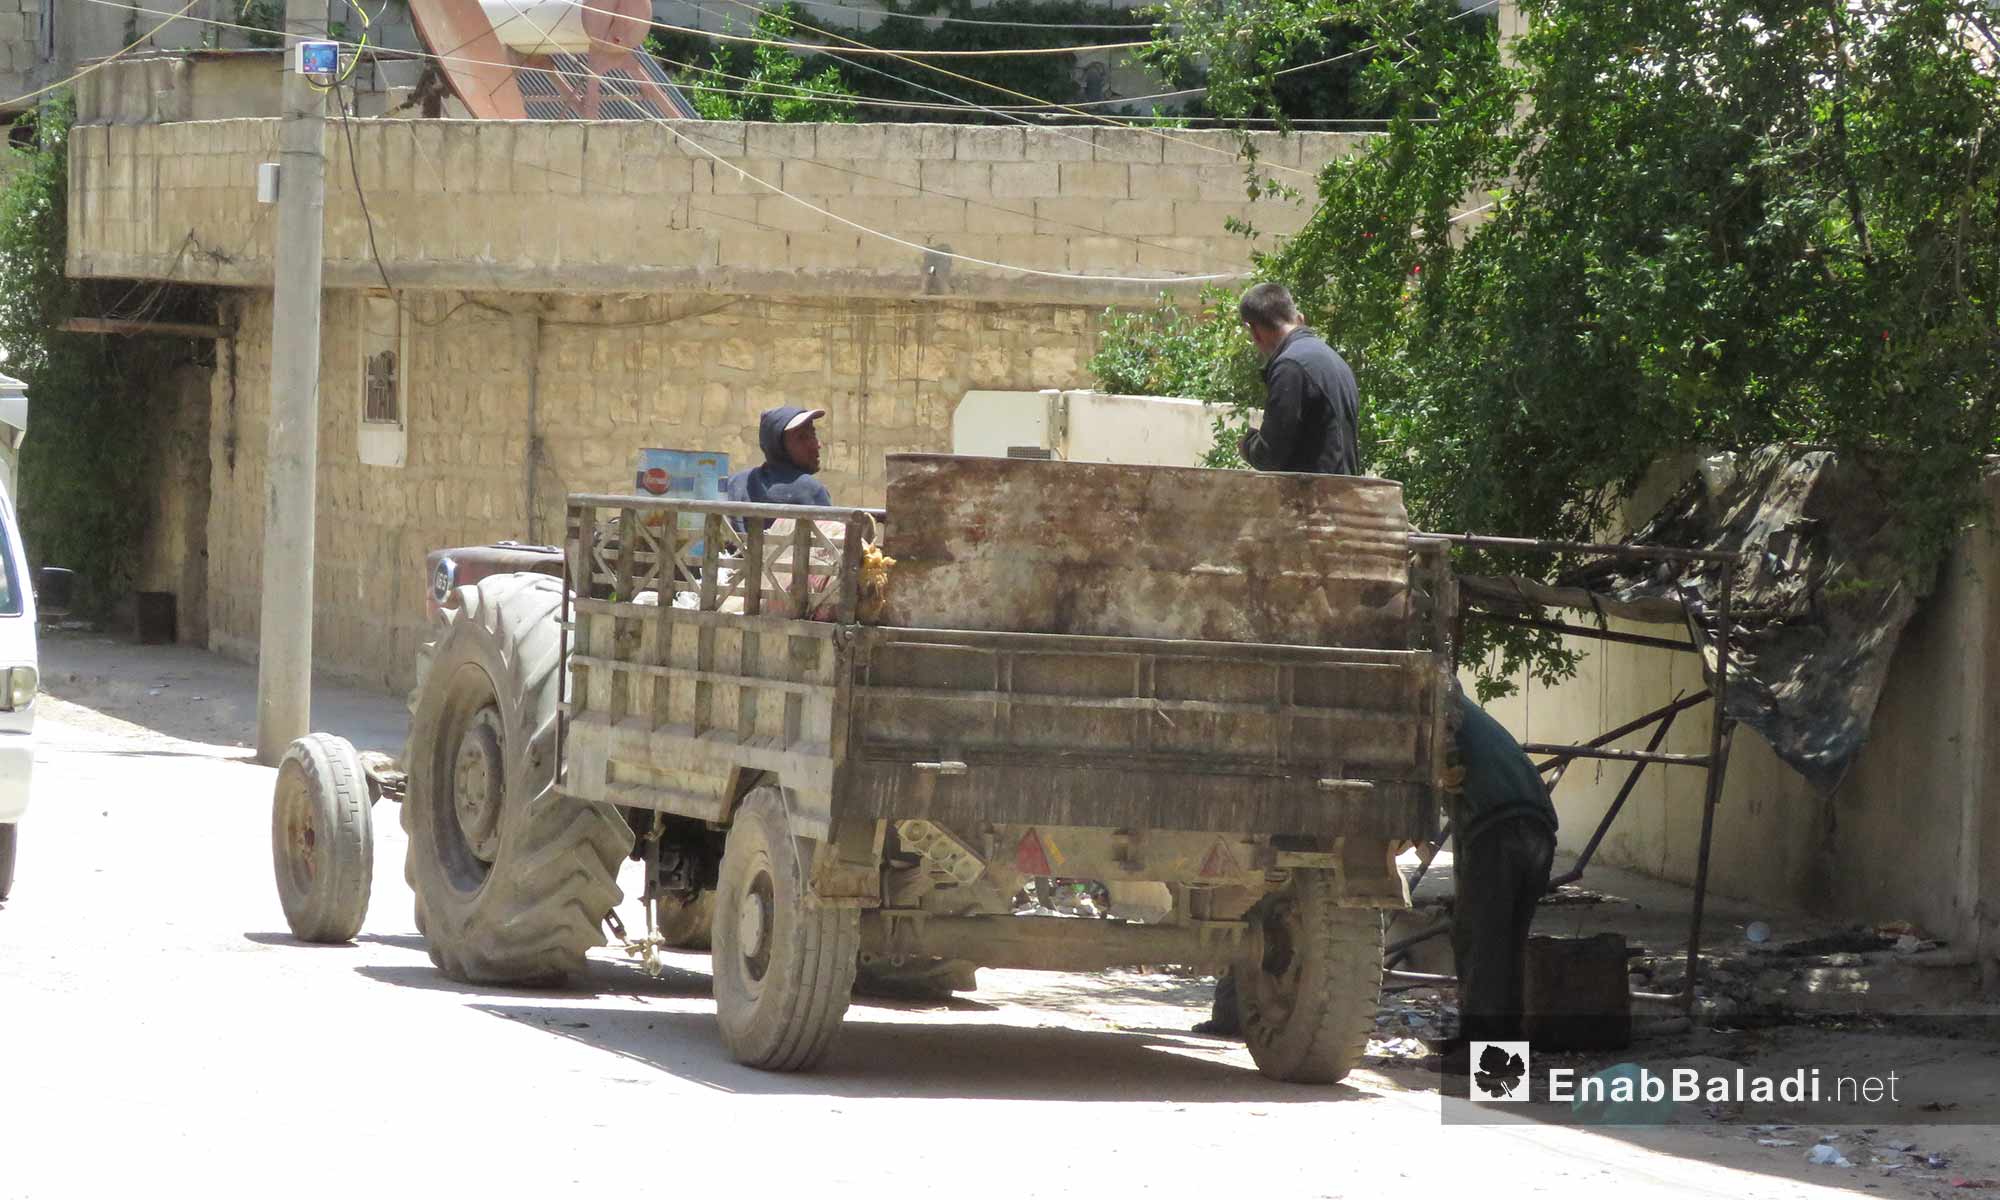 Cleaners in the city of Afrin, rural Aleppo – June 21, 2018 (Enab Baladi)